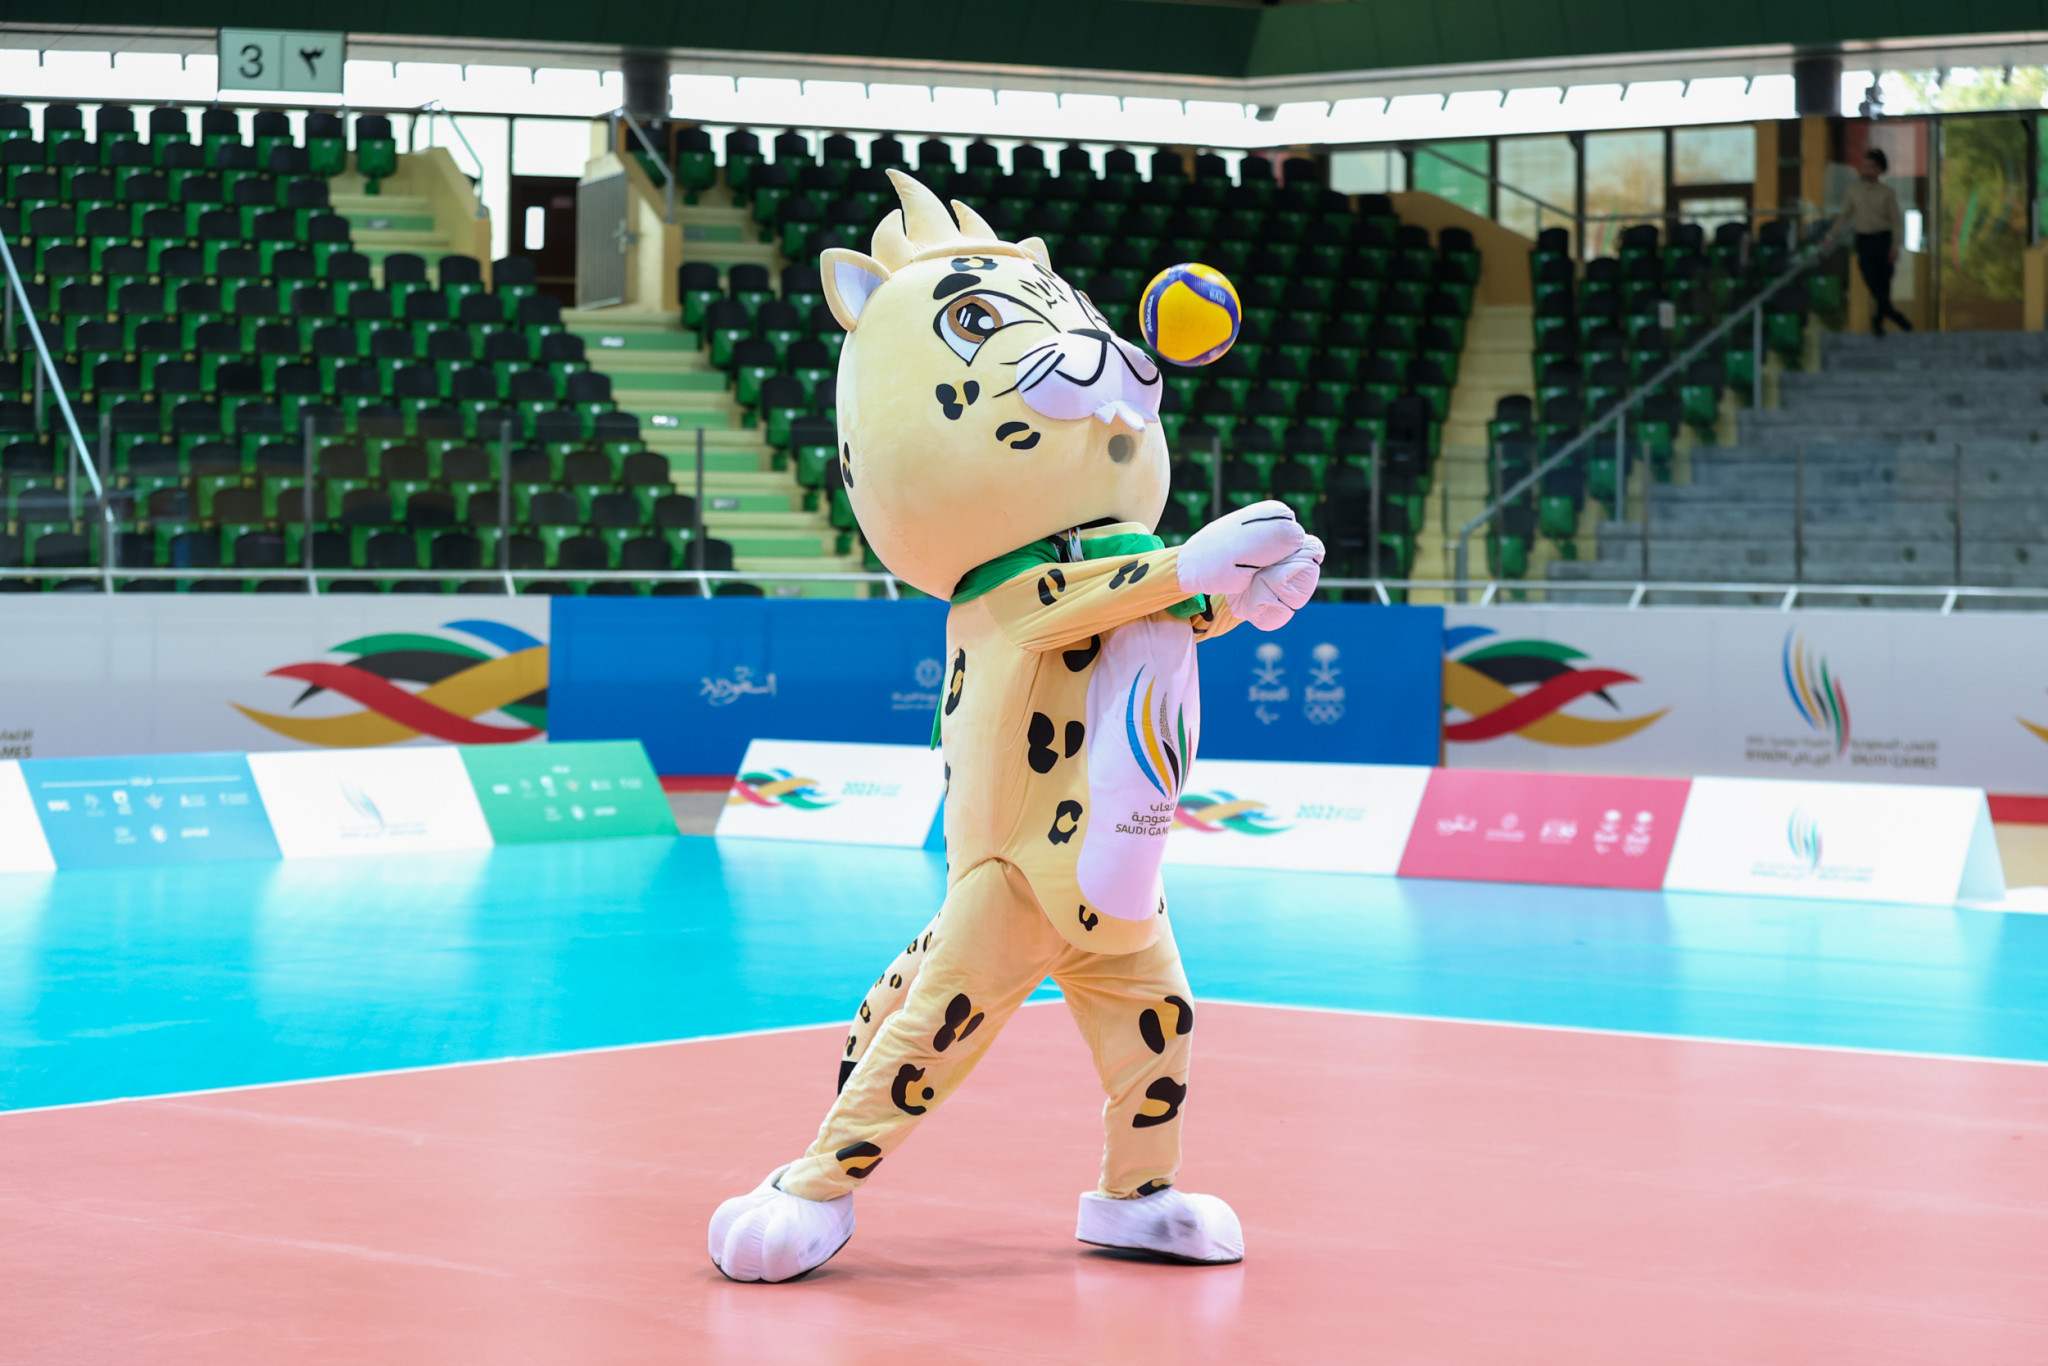 The Arabian leopard was caught taking some time playing volleyball ©Saudi Games